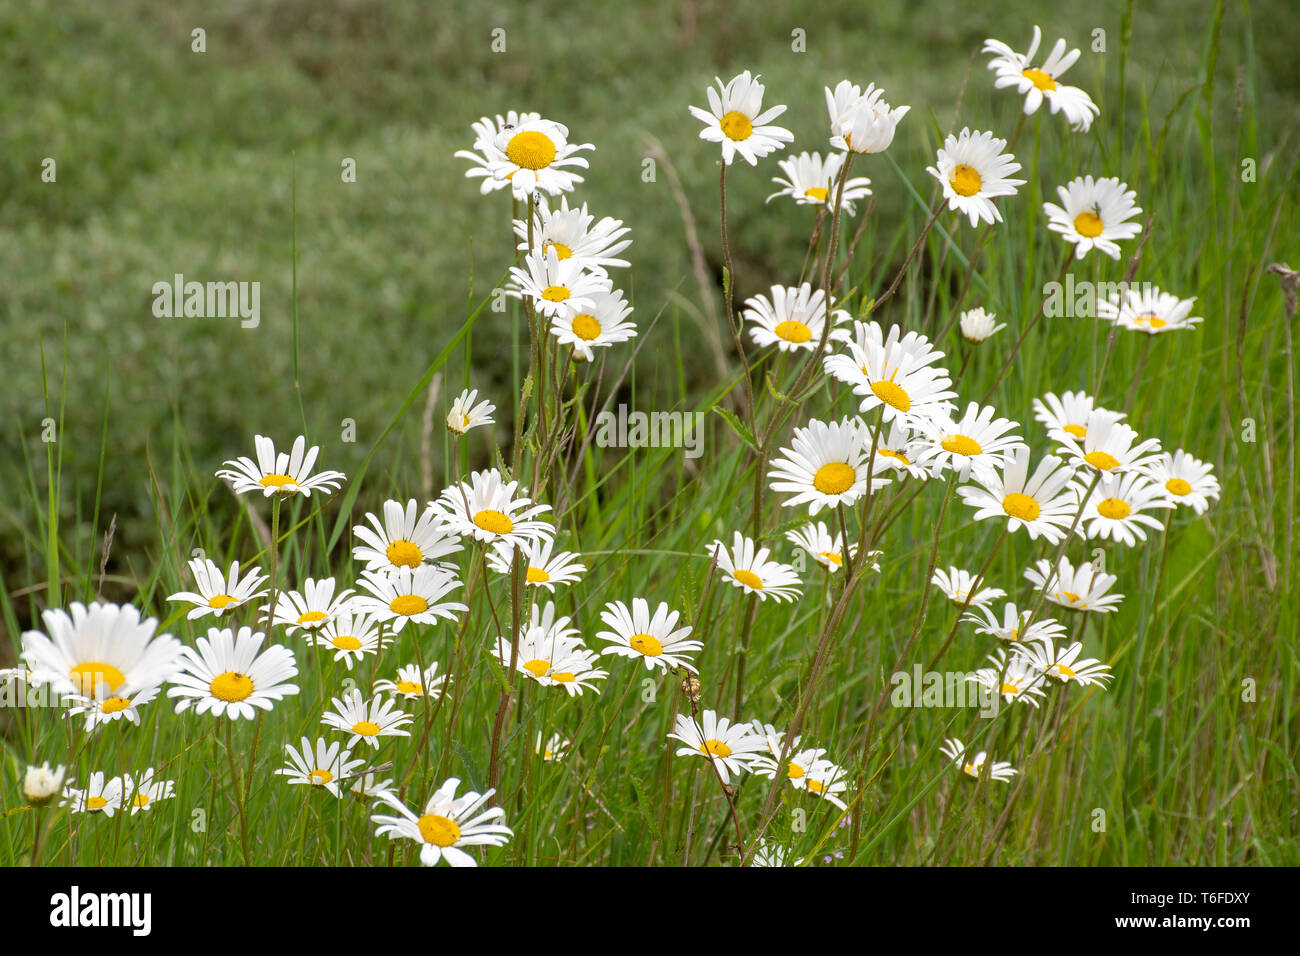 Large group of wild daisies with grass background Stock Photo